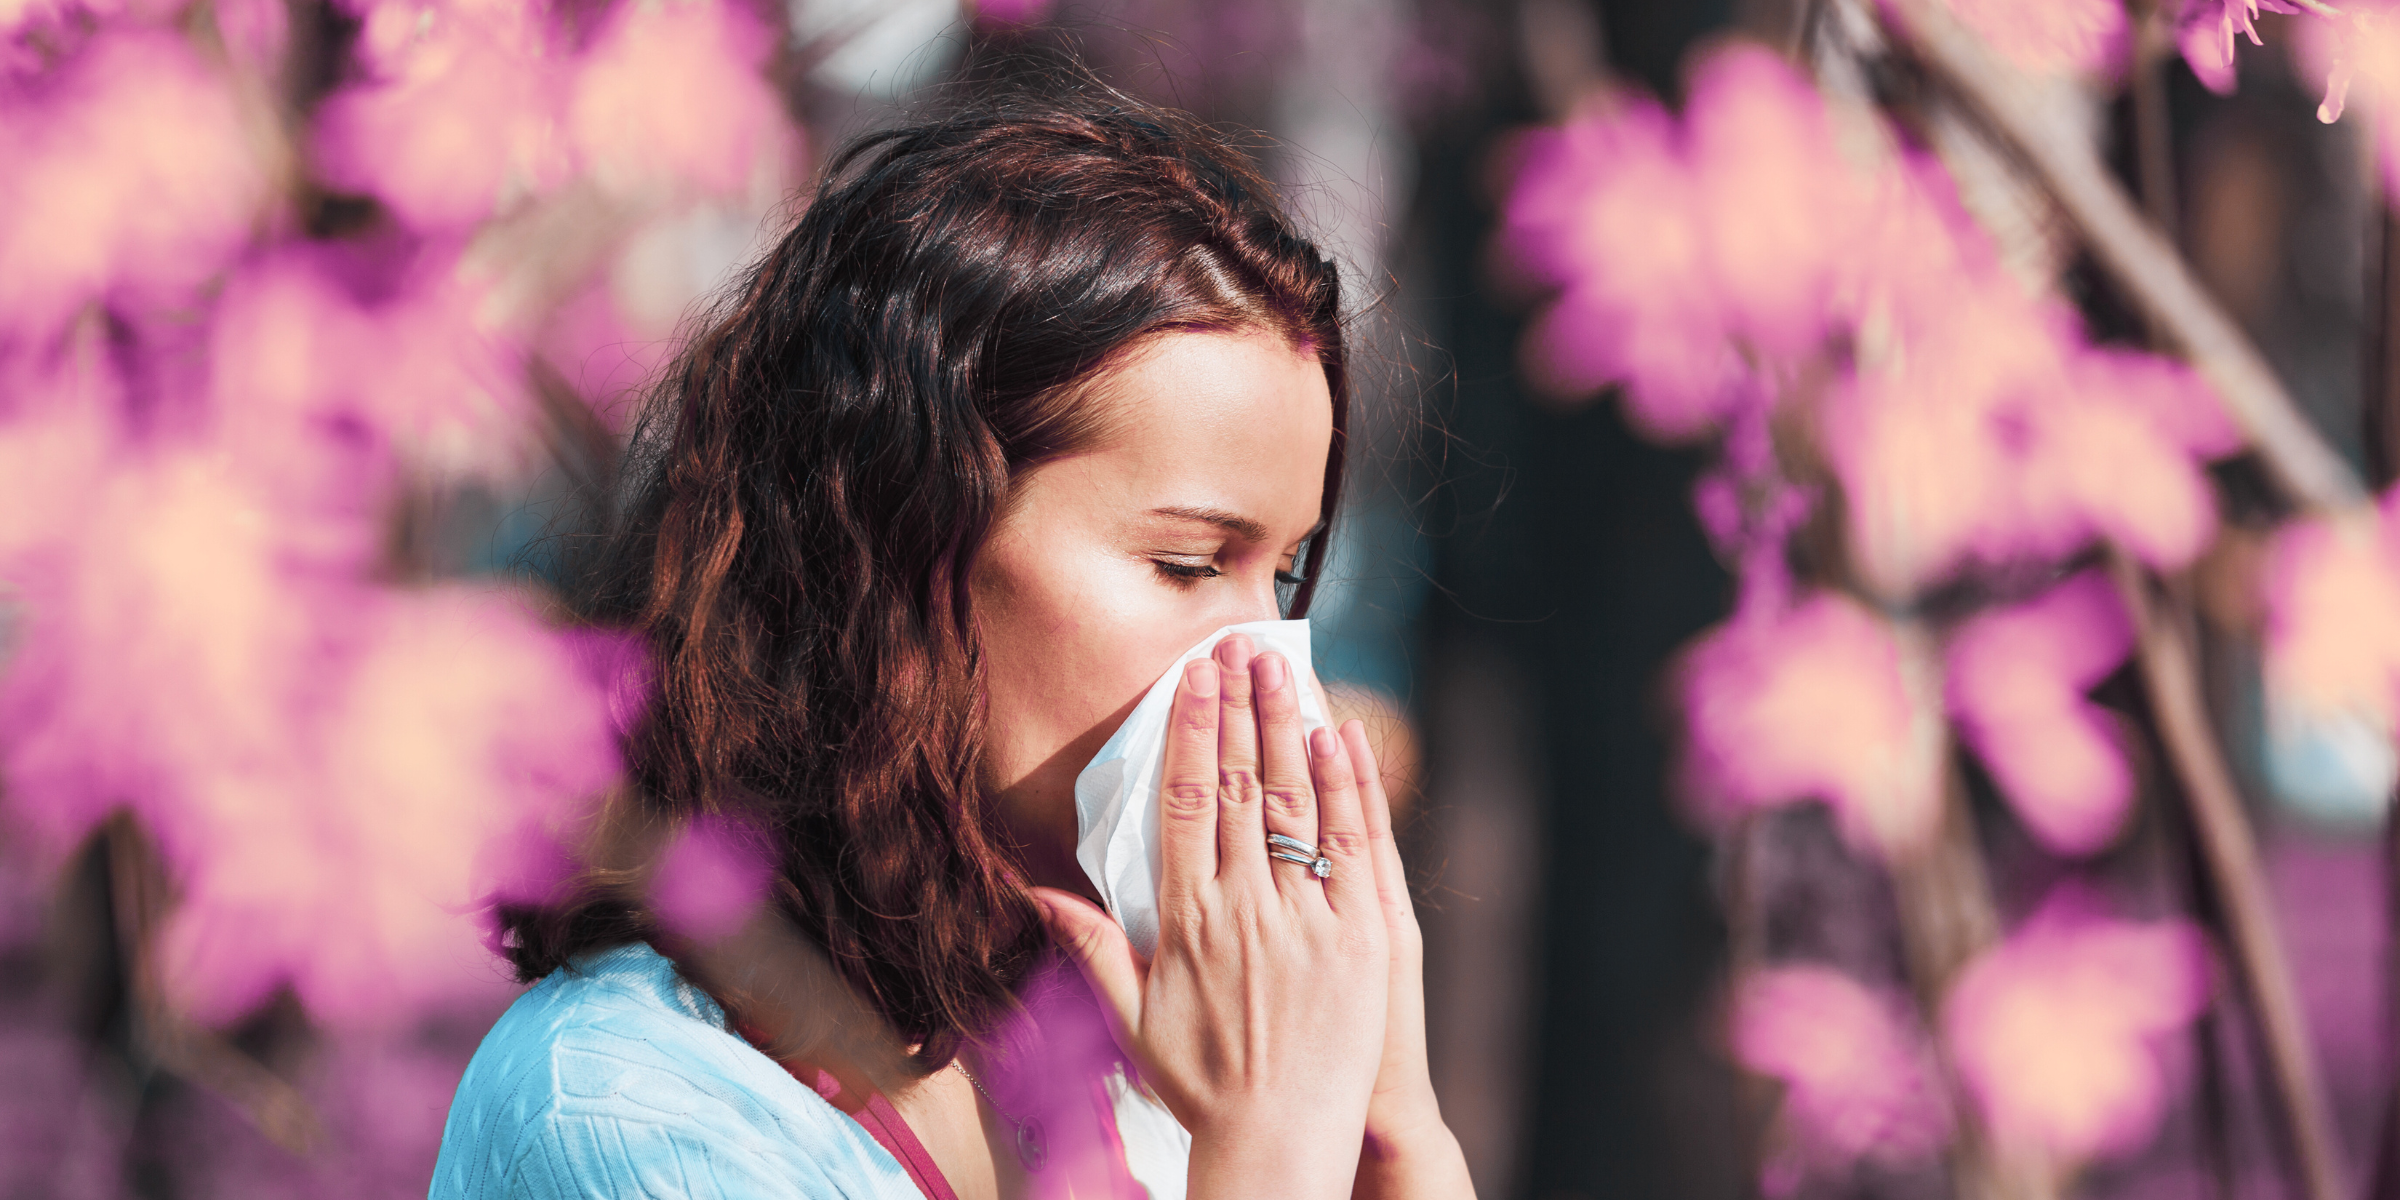 married woman outside with pollen allergies sneezing into tissue